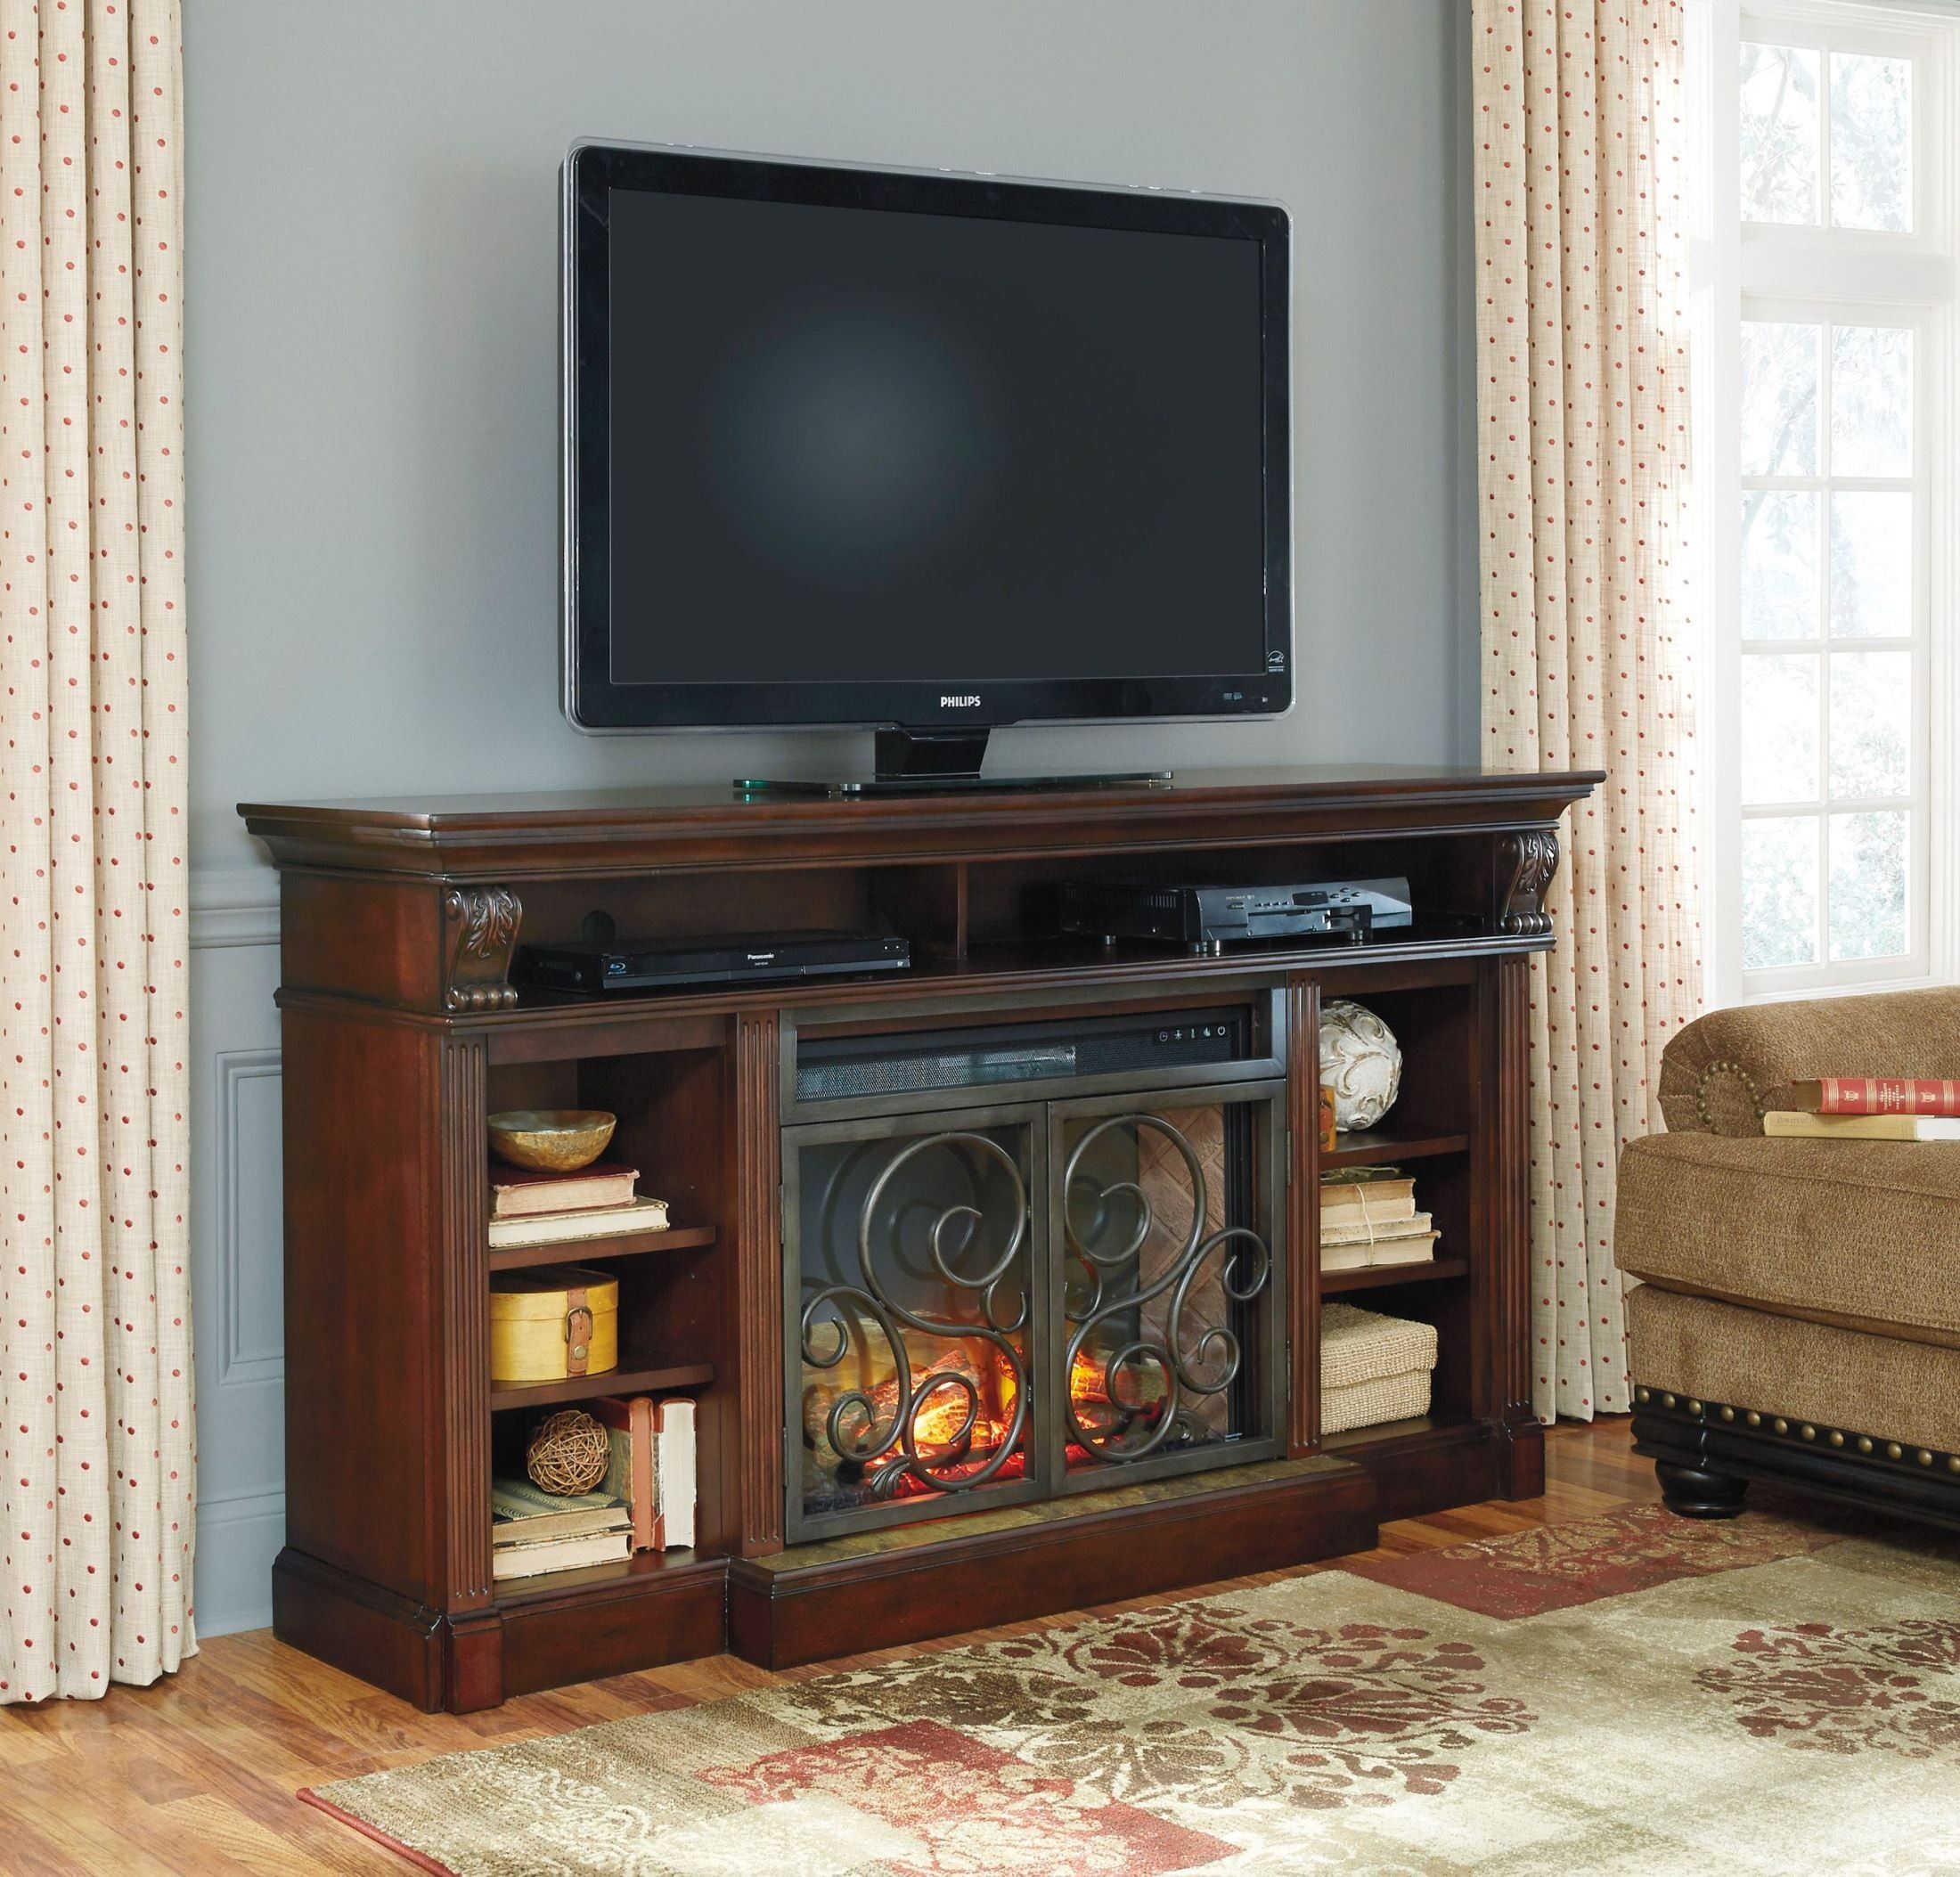 Jcpenney Fireplace Awesome ashley Furniture attic Fireplaces